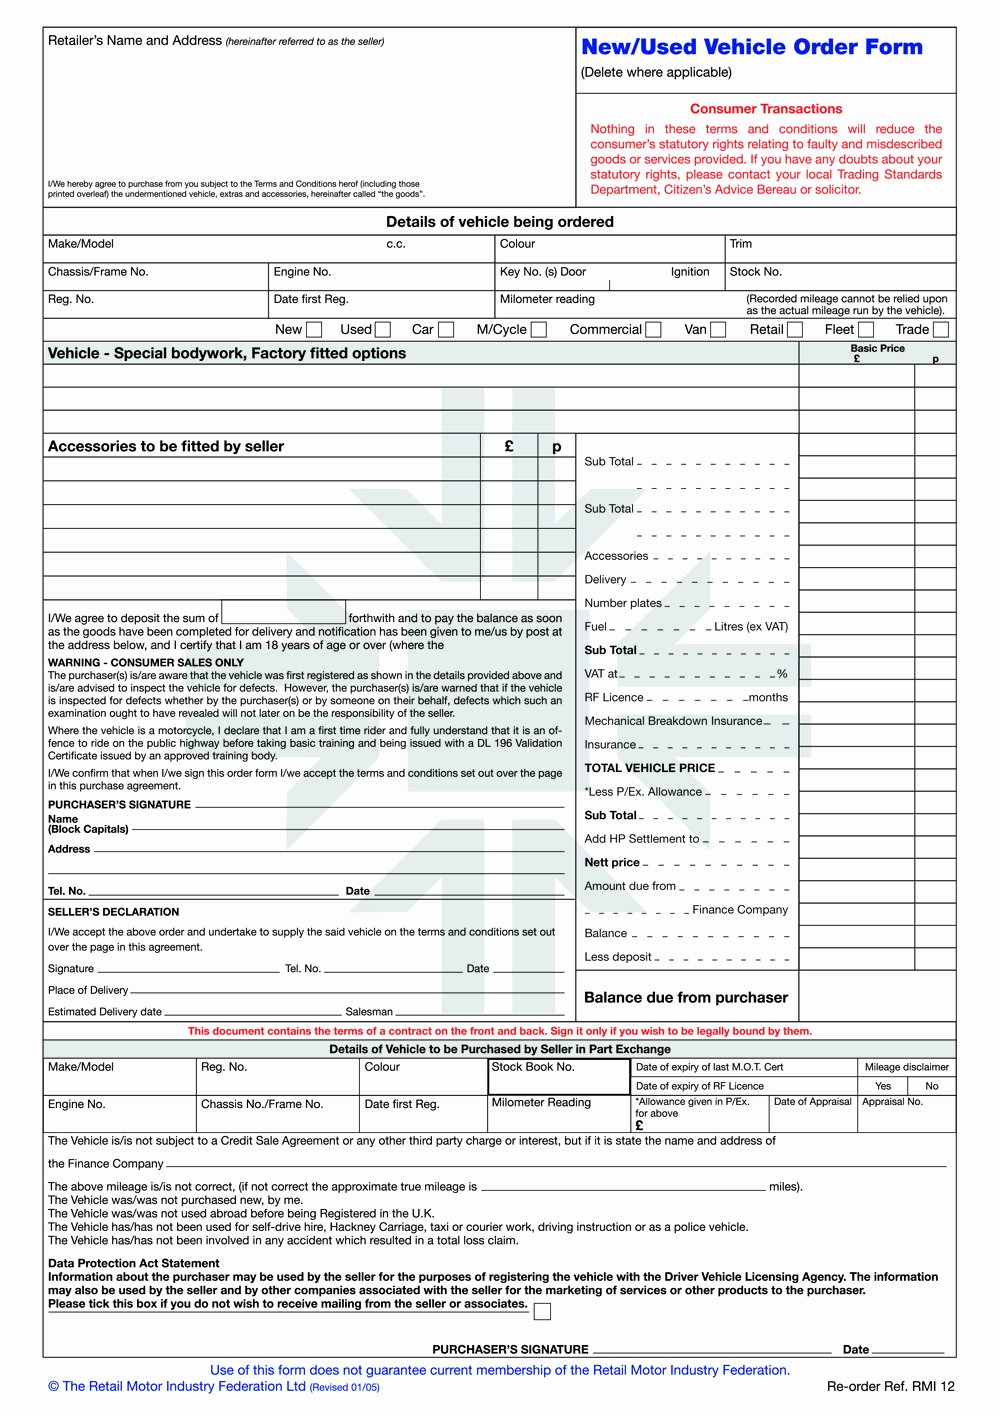 Vehicle Purchase order Template Best Of Rmi012p New Used Vehicle order form Pad Rmi Webshop